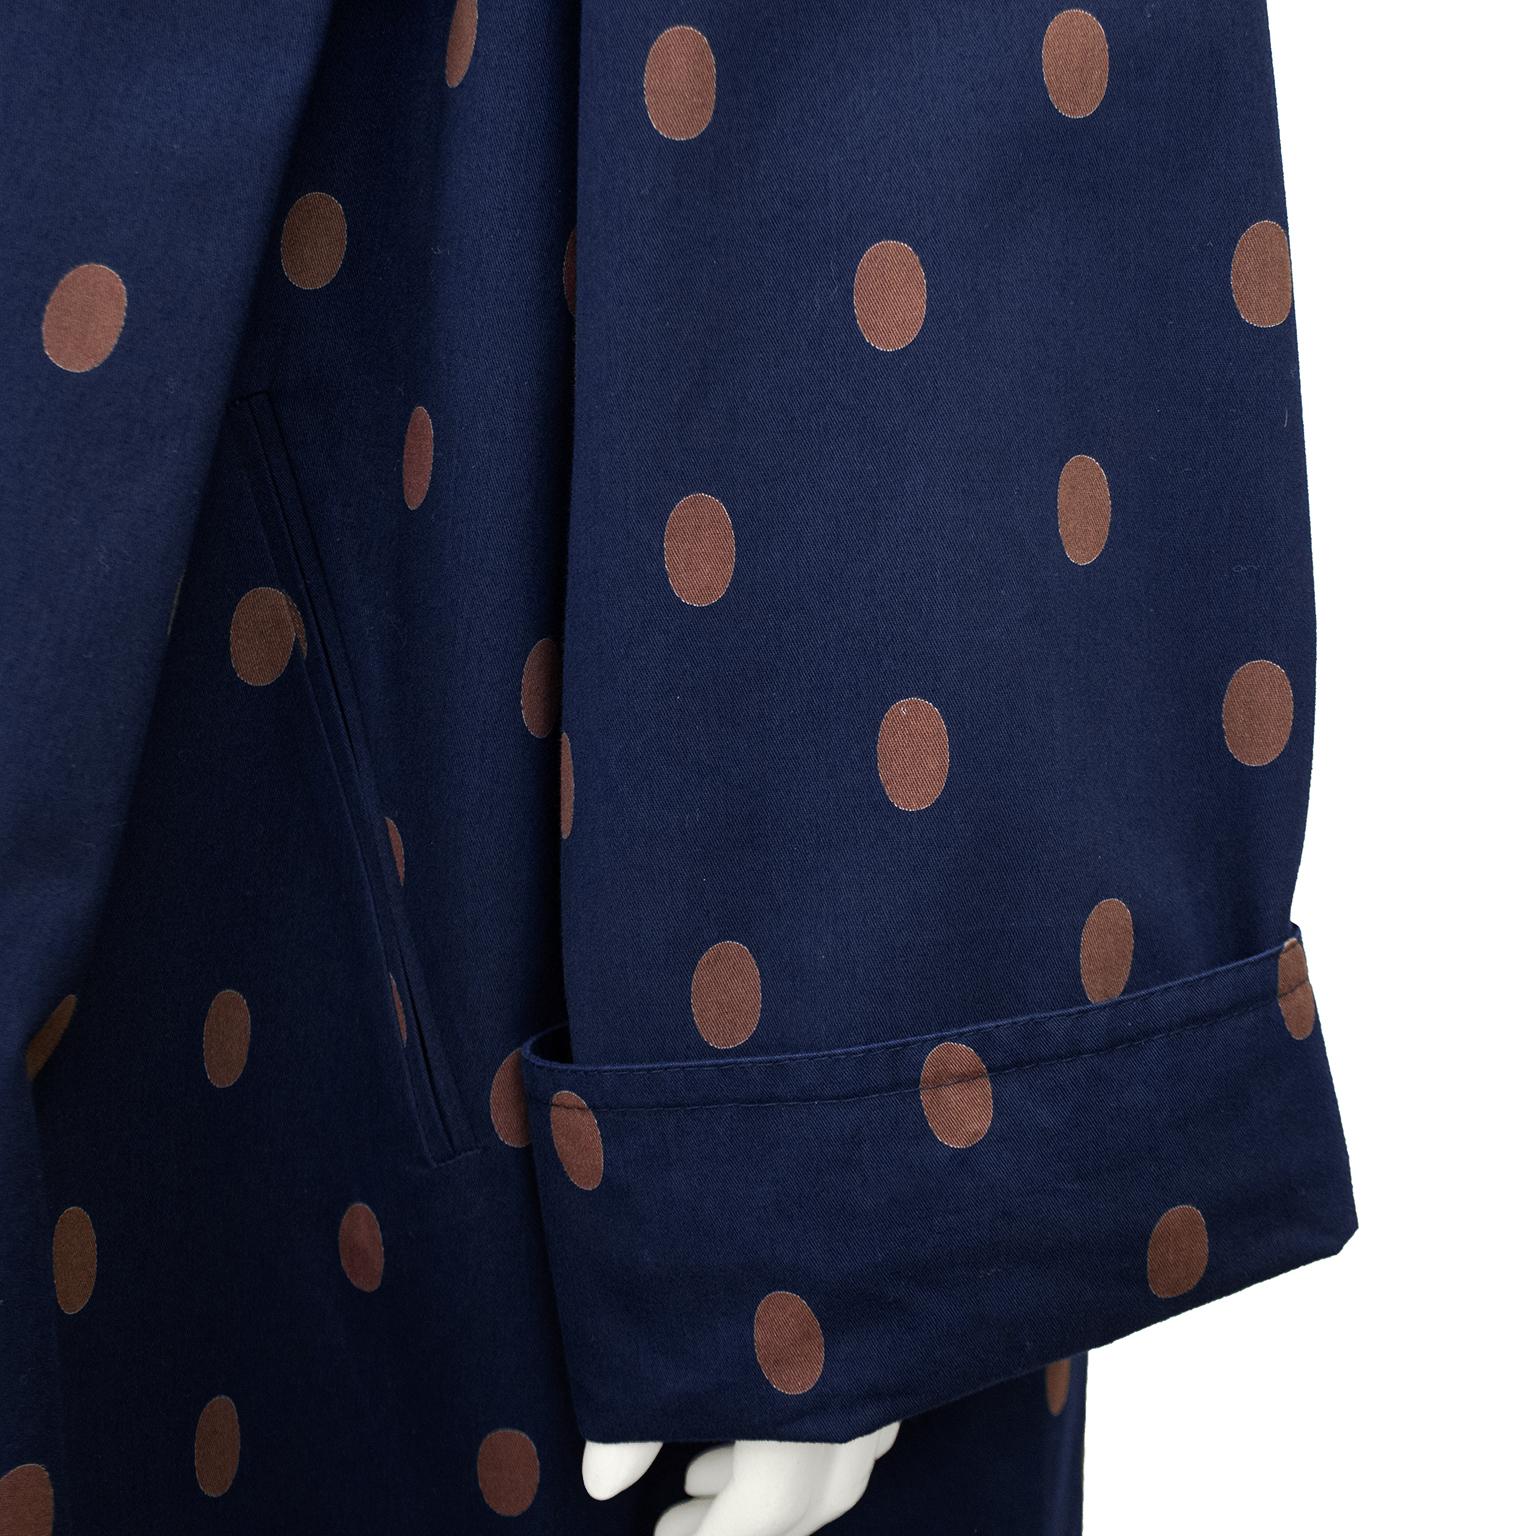 2000s Gianfranco Ferre Navy and Brown Polka Dot Spring Weight Coat  In Good Condition For Sale In Toronto, Ontario